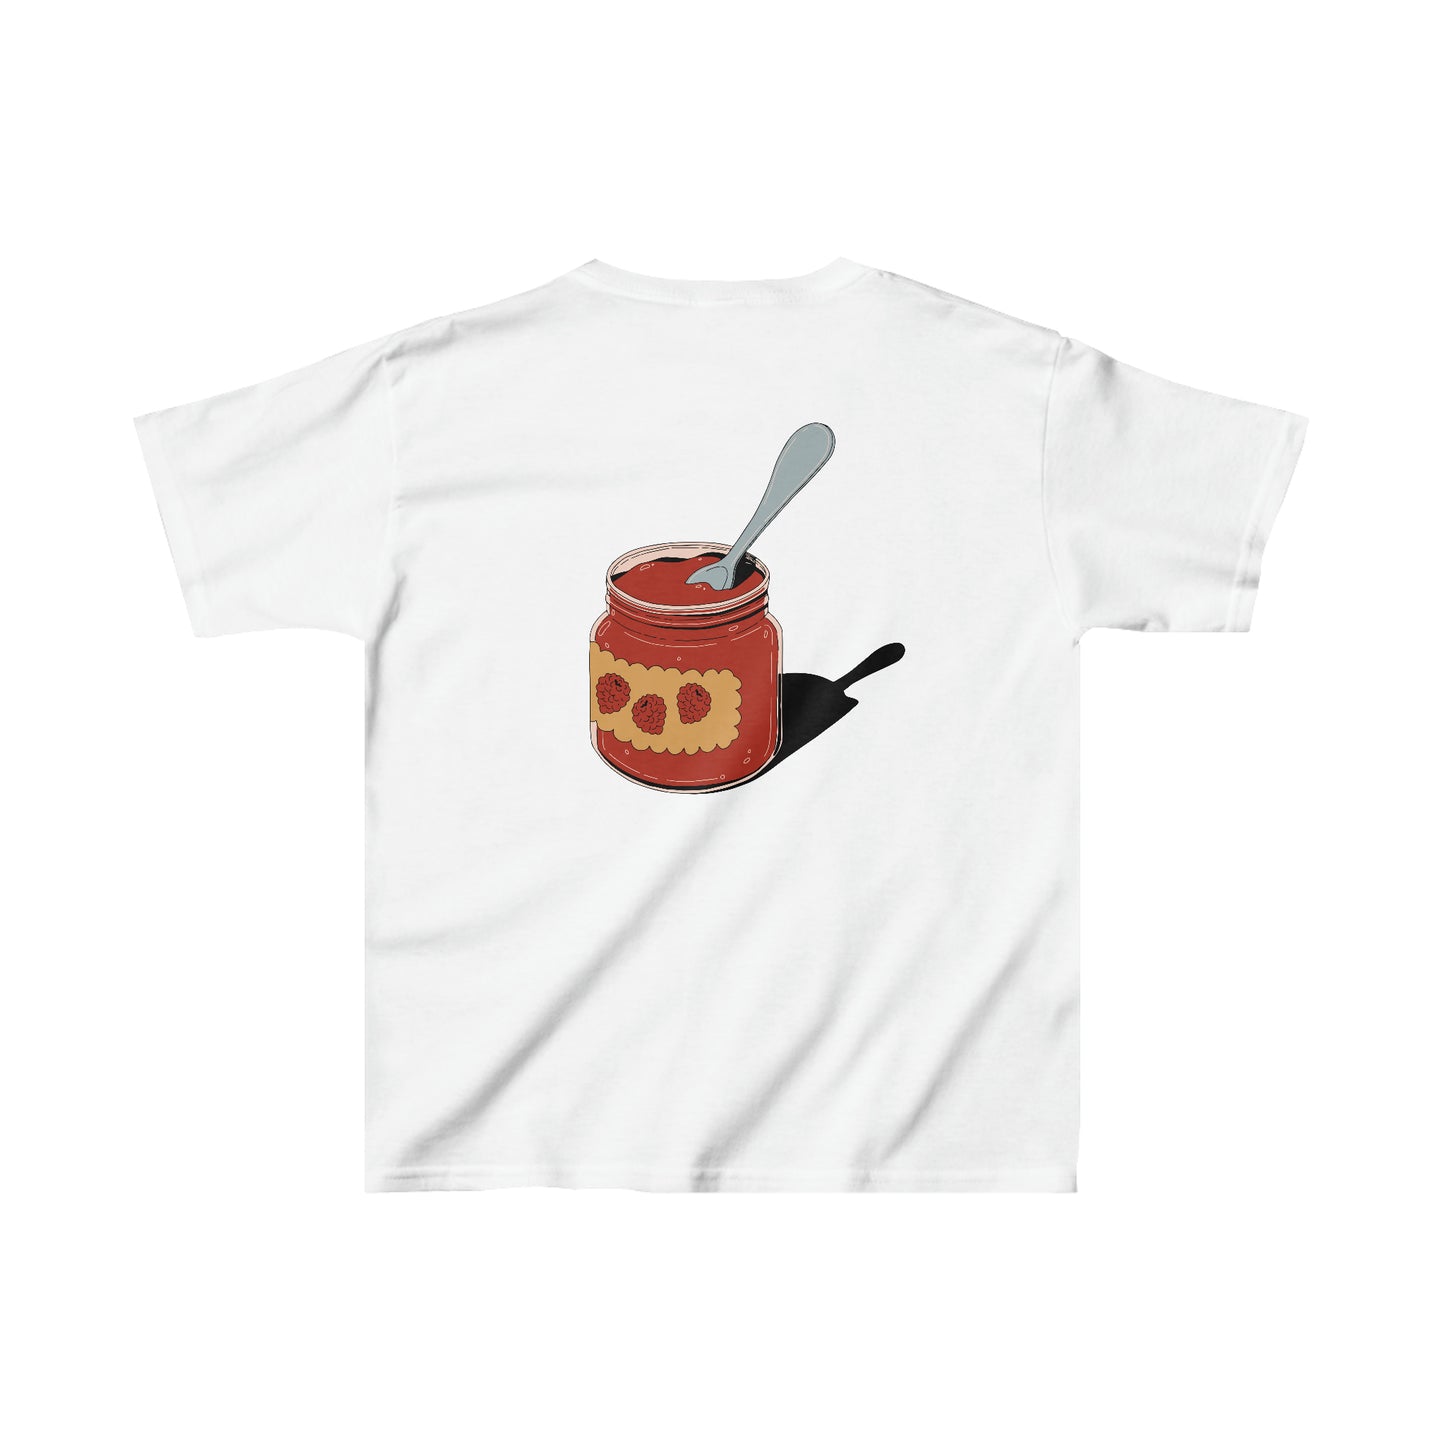 RASPBERRY double-sided t-shirt - child double-sided